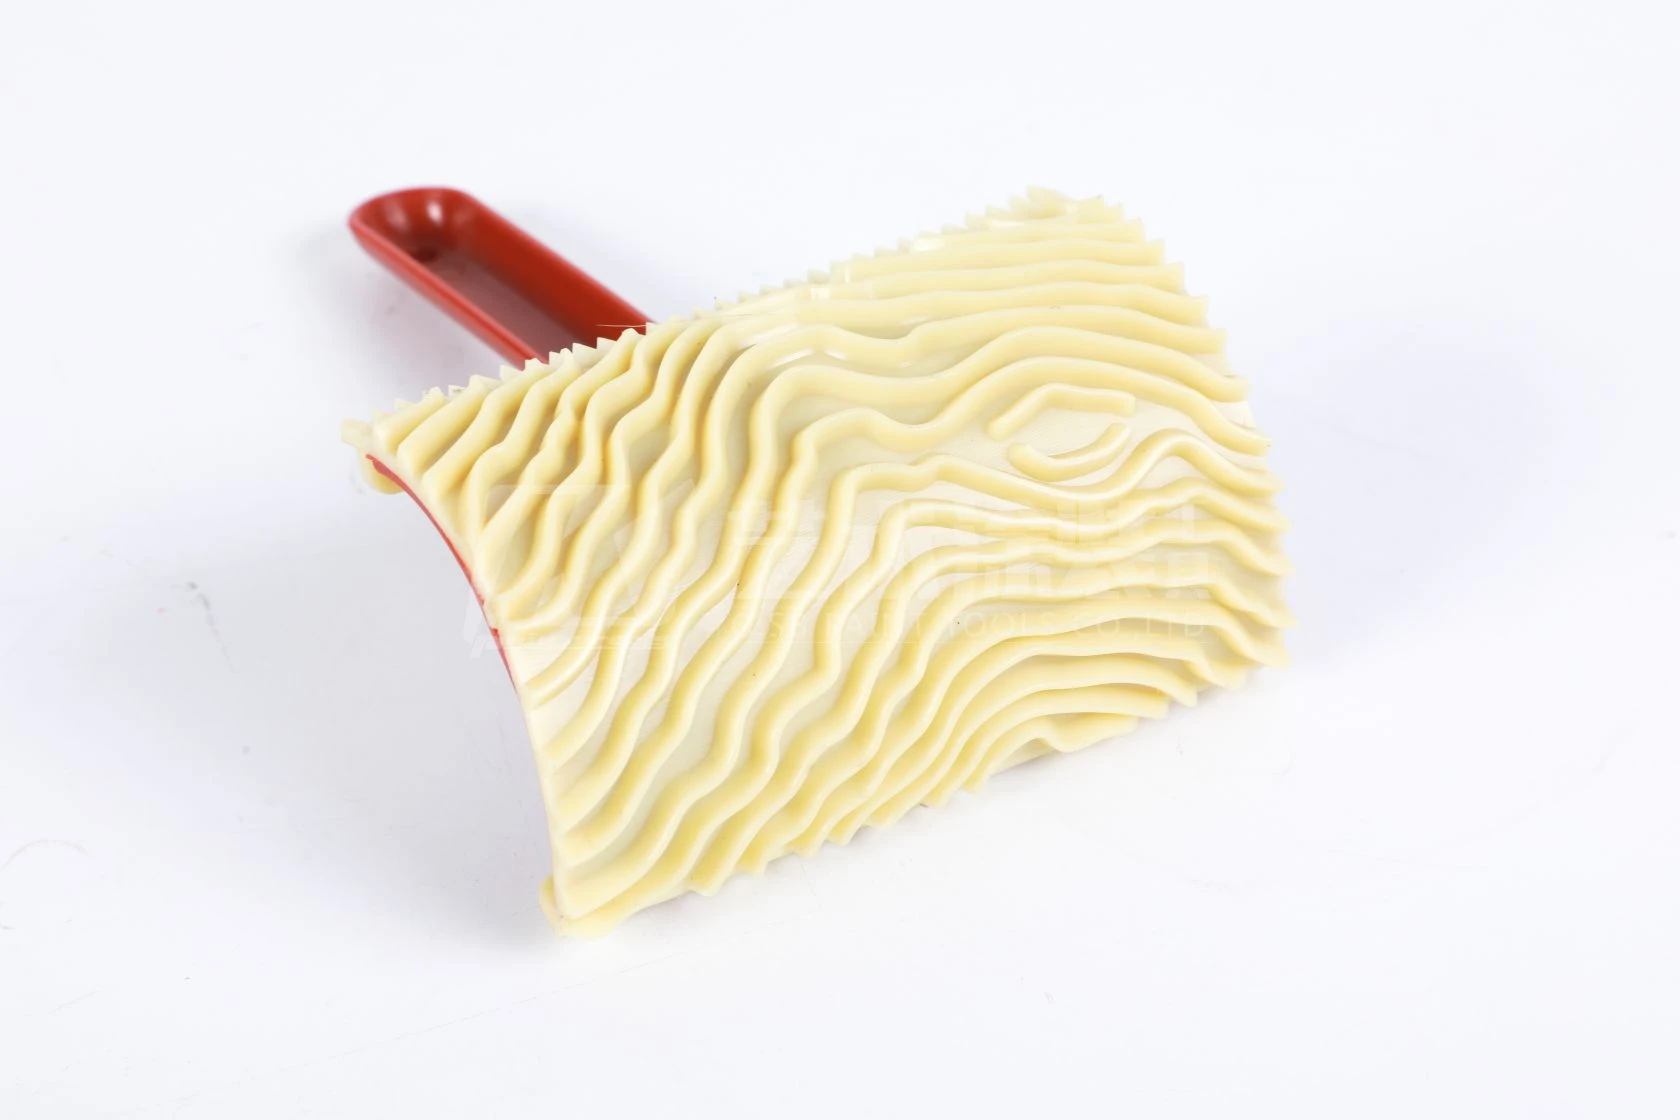 textured paint roller patterns wall rubber roller paint brush tools wood grain rubber painting tool roller brush